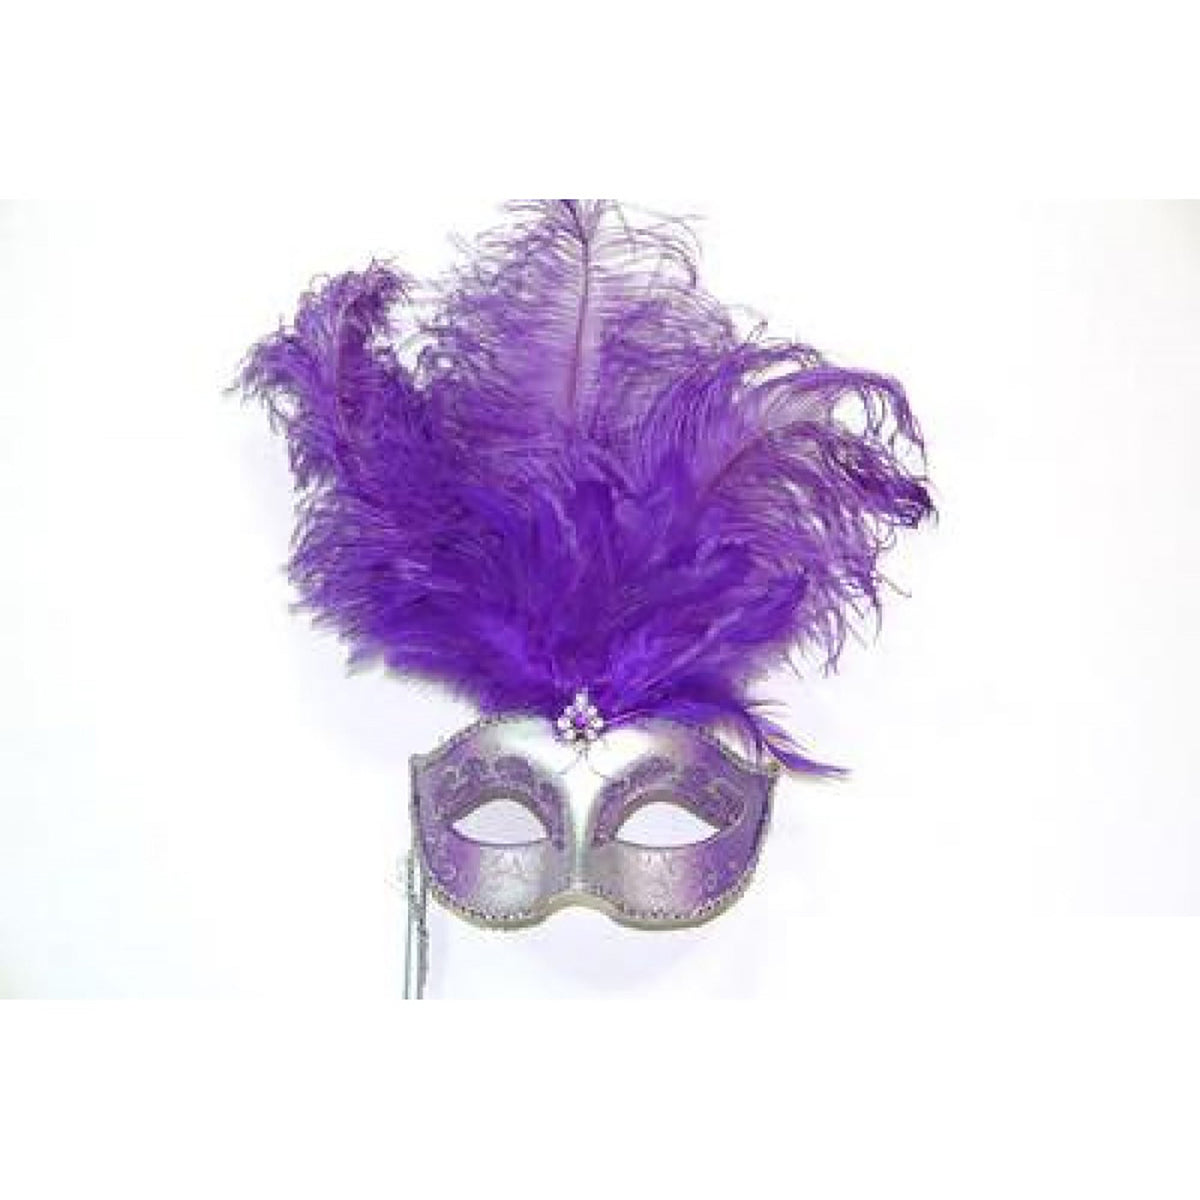 KBW GLOBAL CORP Costume Accessories Silver and Purple Venetian Mask with Ostrich Feathers and Stick, 1 Count